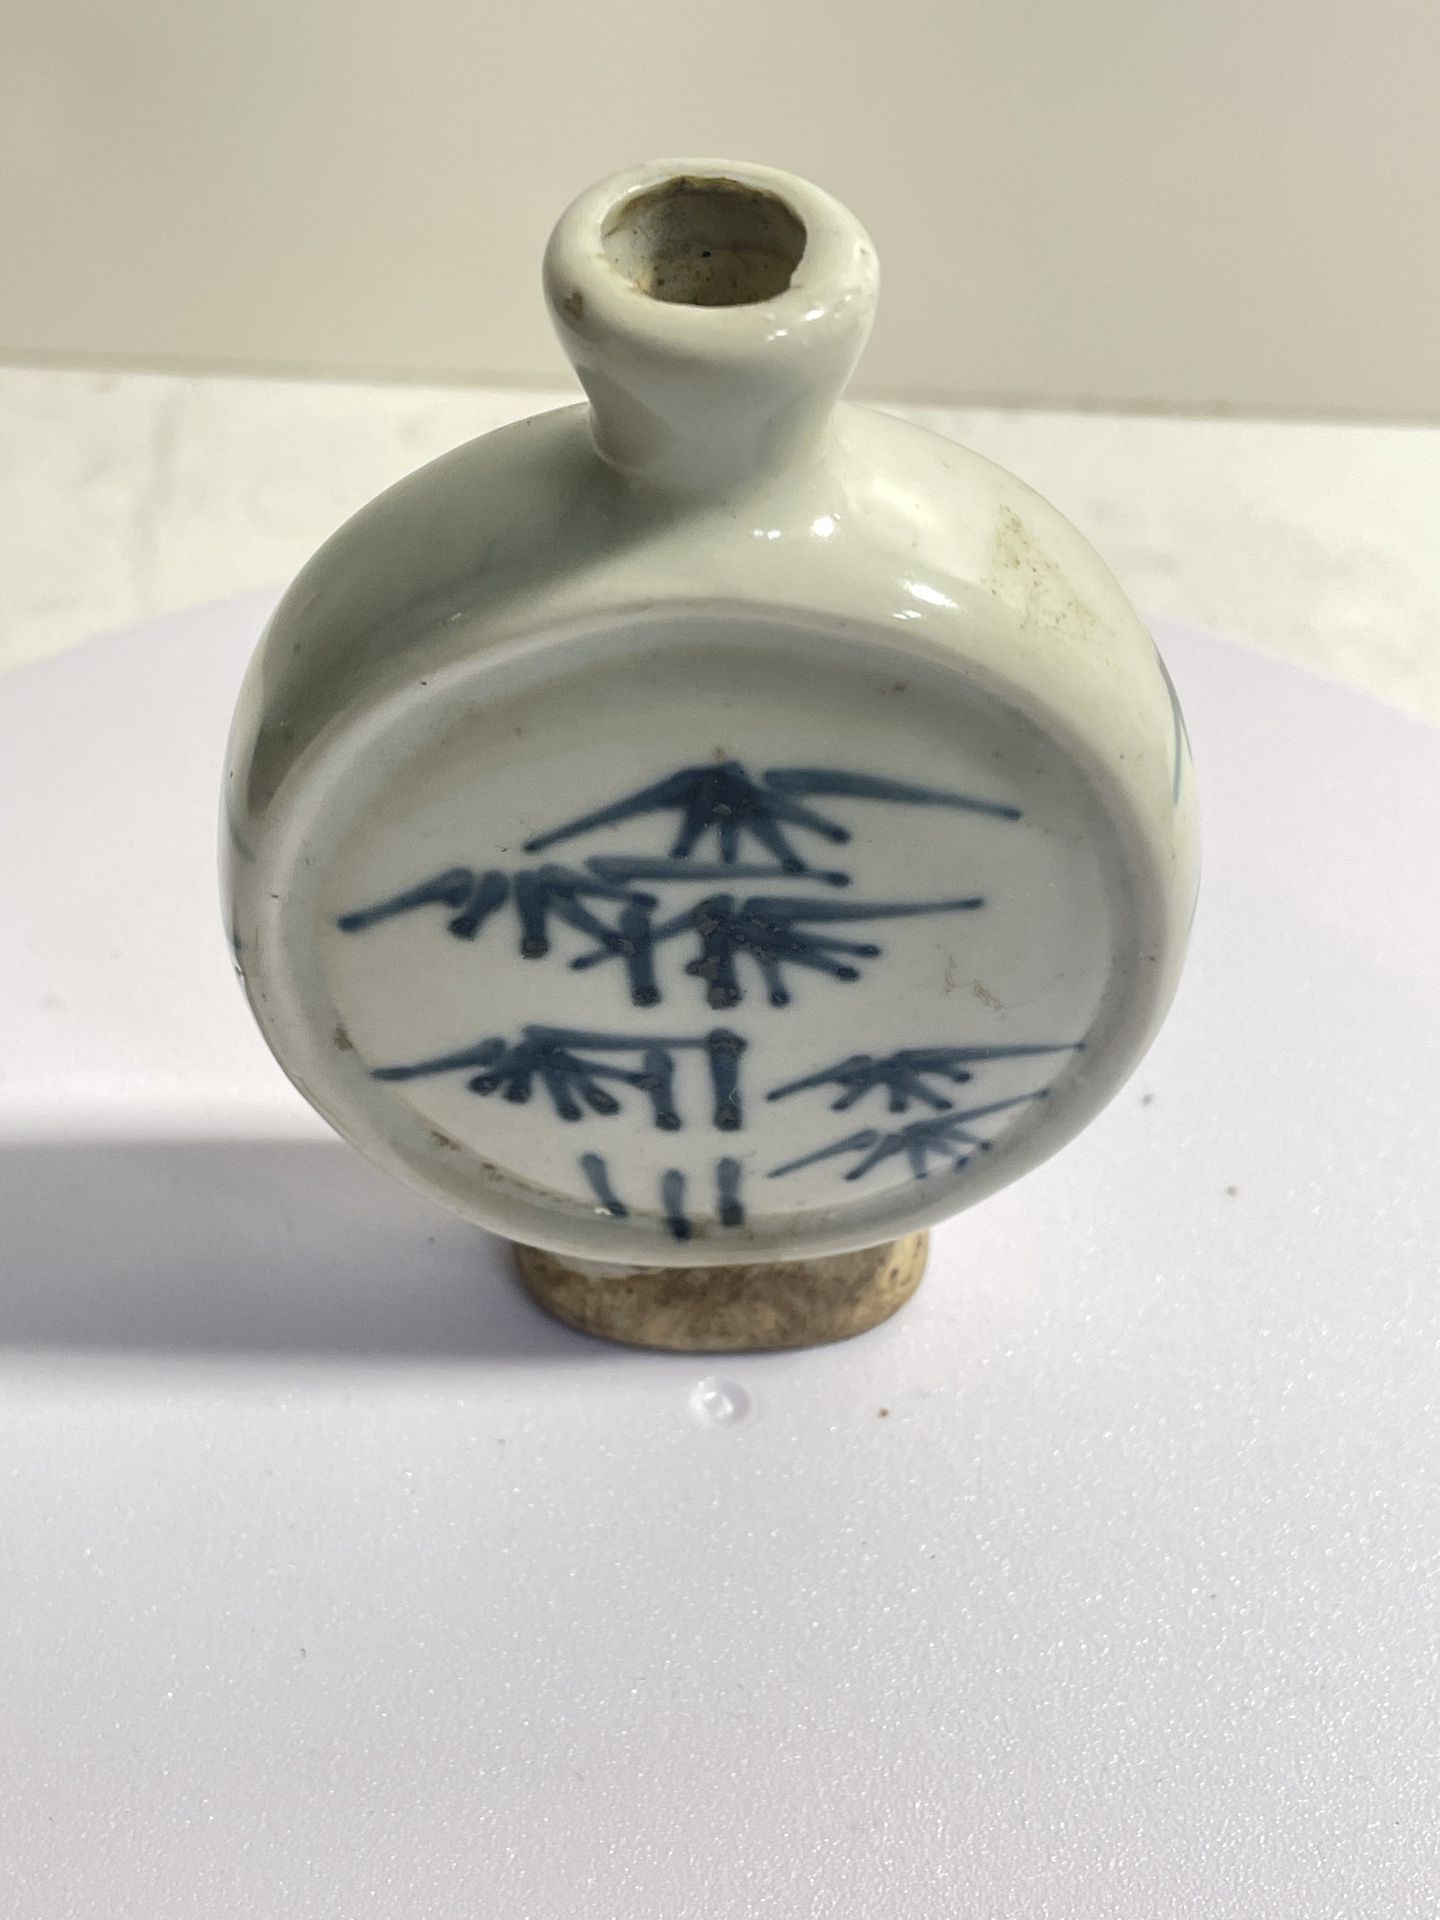 Vintage Chinese blue and white porcelain snuff bottle